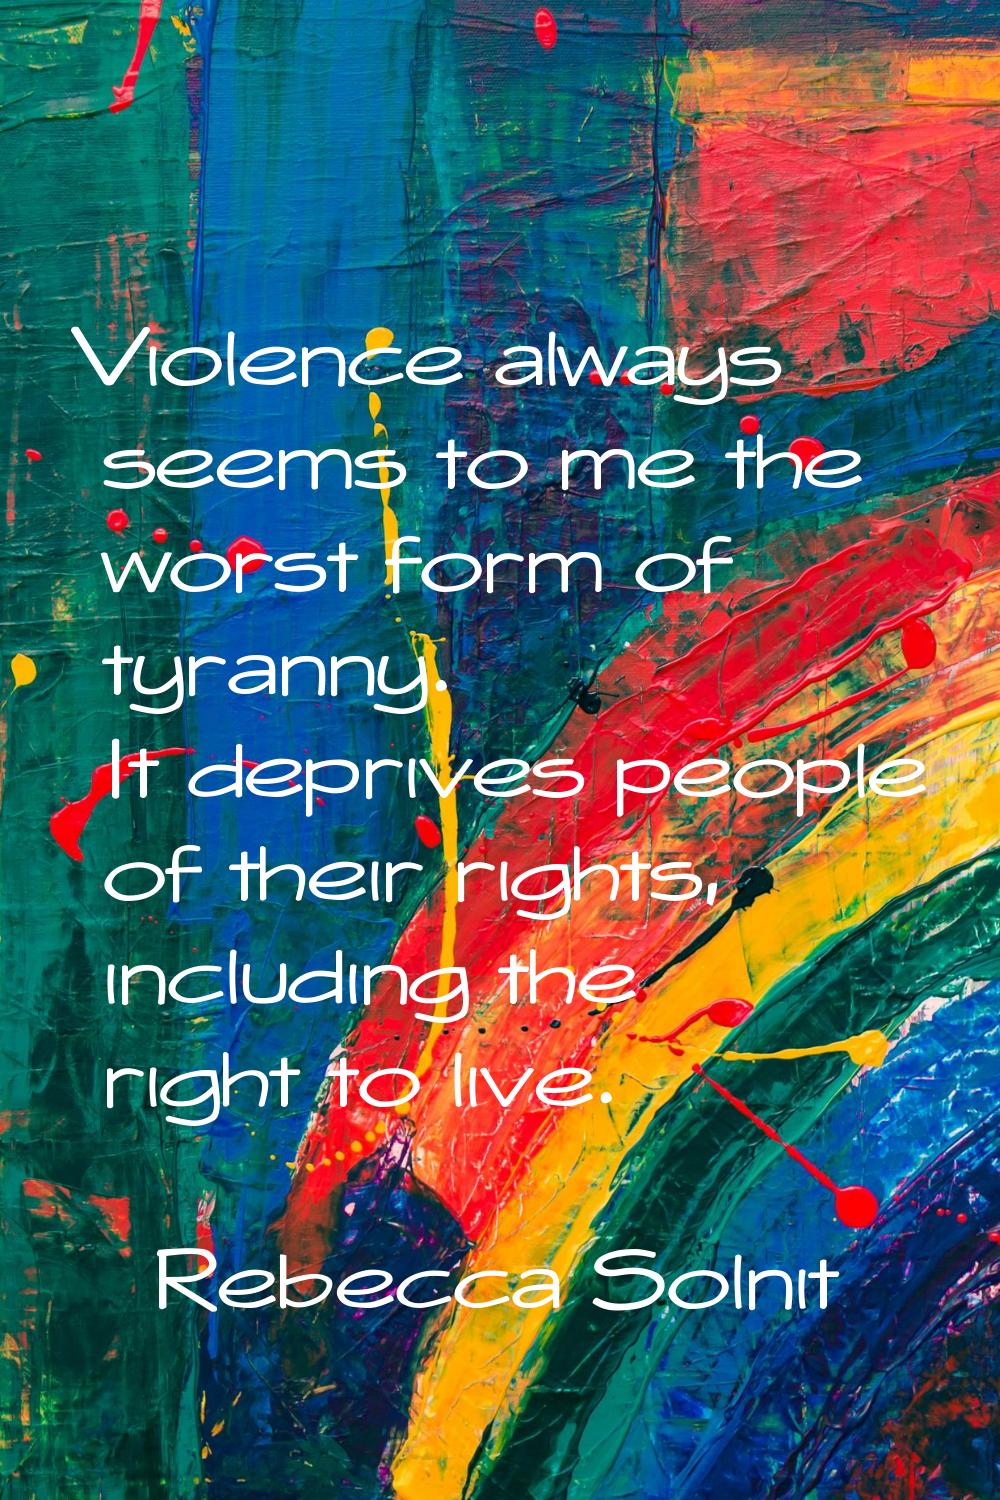 Violence always seems to me the worst form of tyranny. It deprives people of their rights, includin